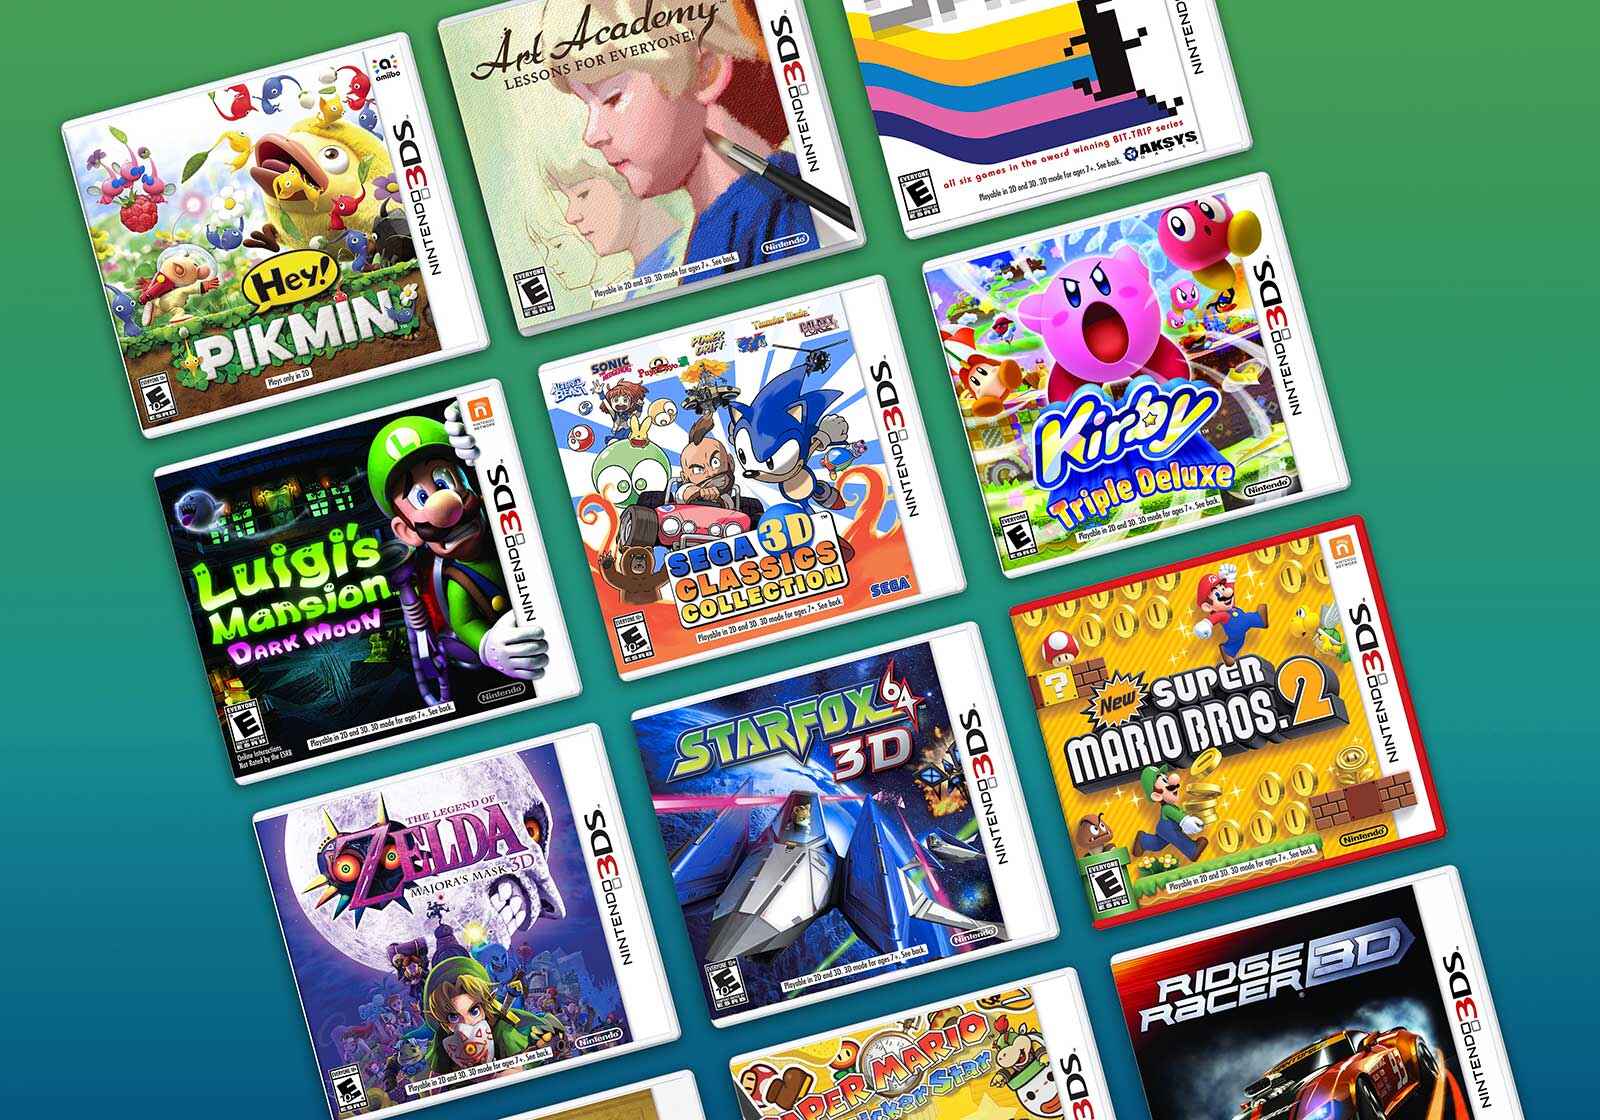 How To Download Games To The 3Ds